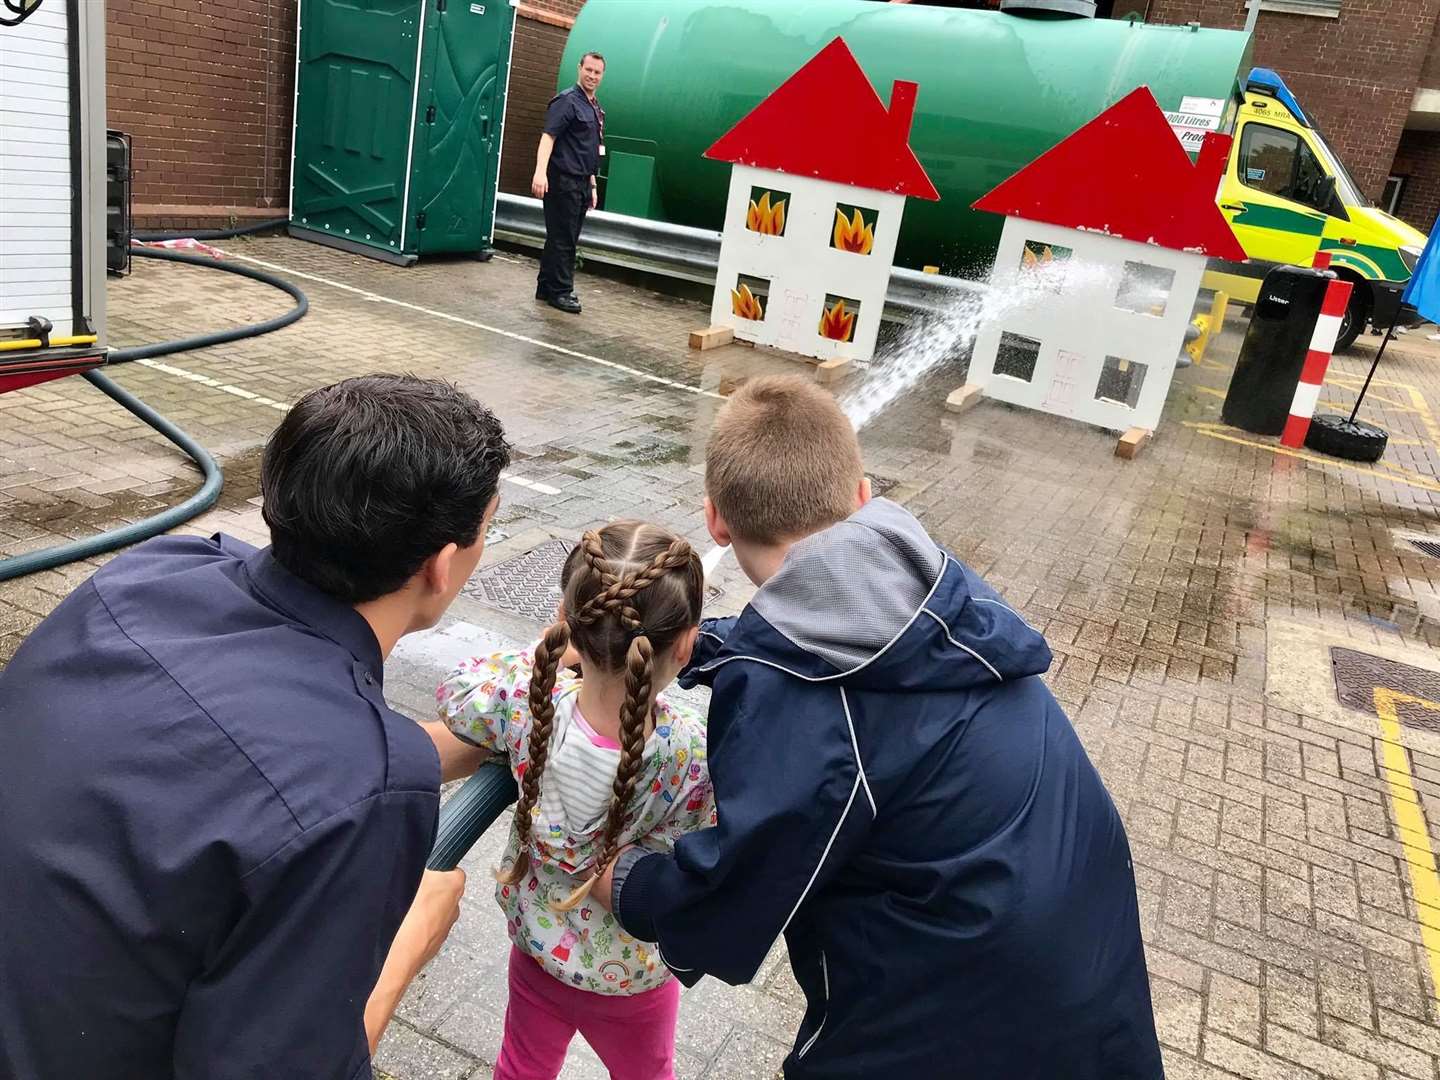 Fun, games and learning at last year's open day at Folkestone station. Picture: KFRS